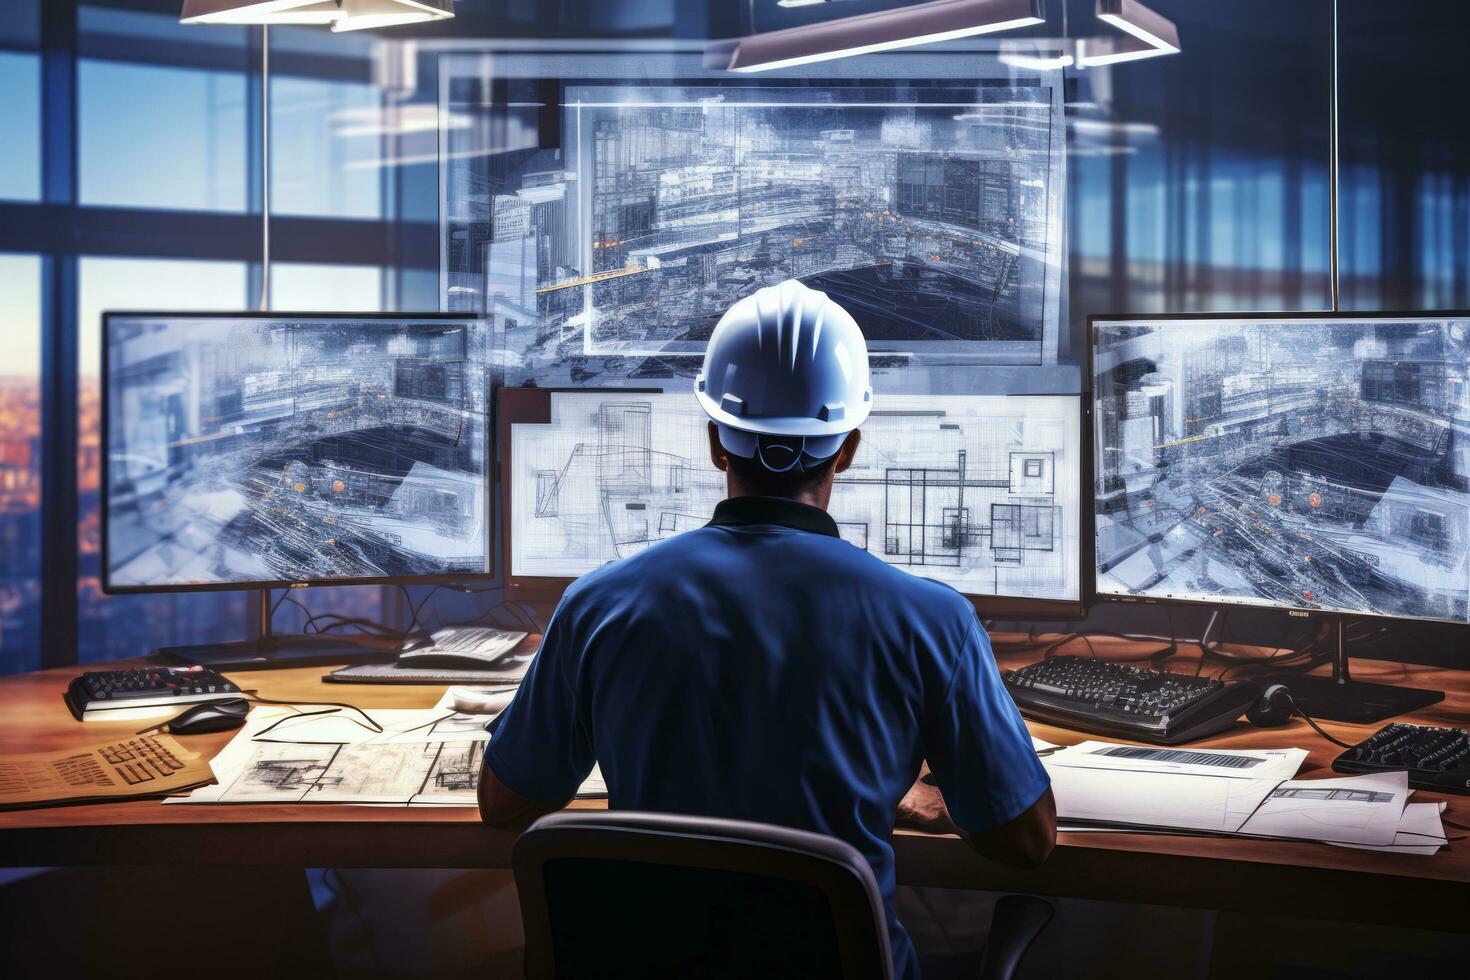 AI generated An engineer working on architectural plans with dual monitors, drafting tools, and a hard hat on the desk photo